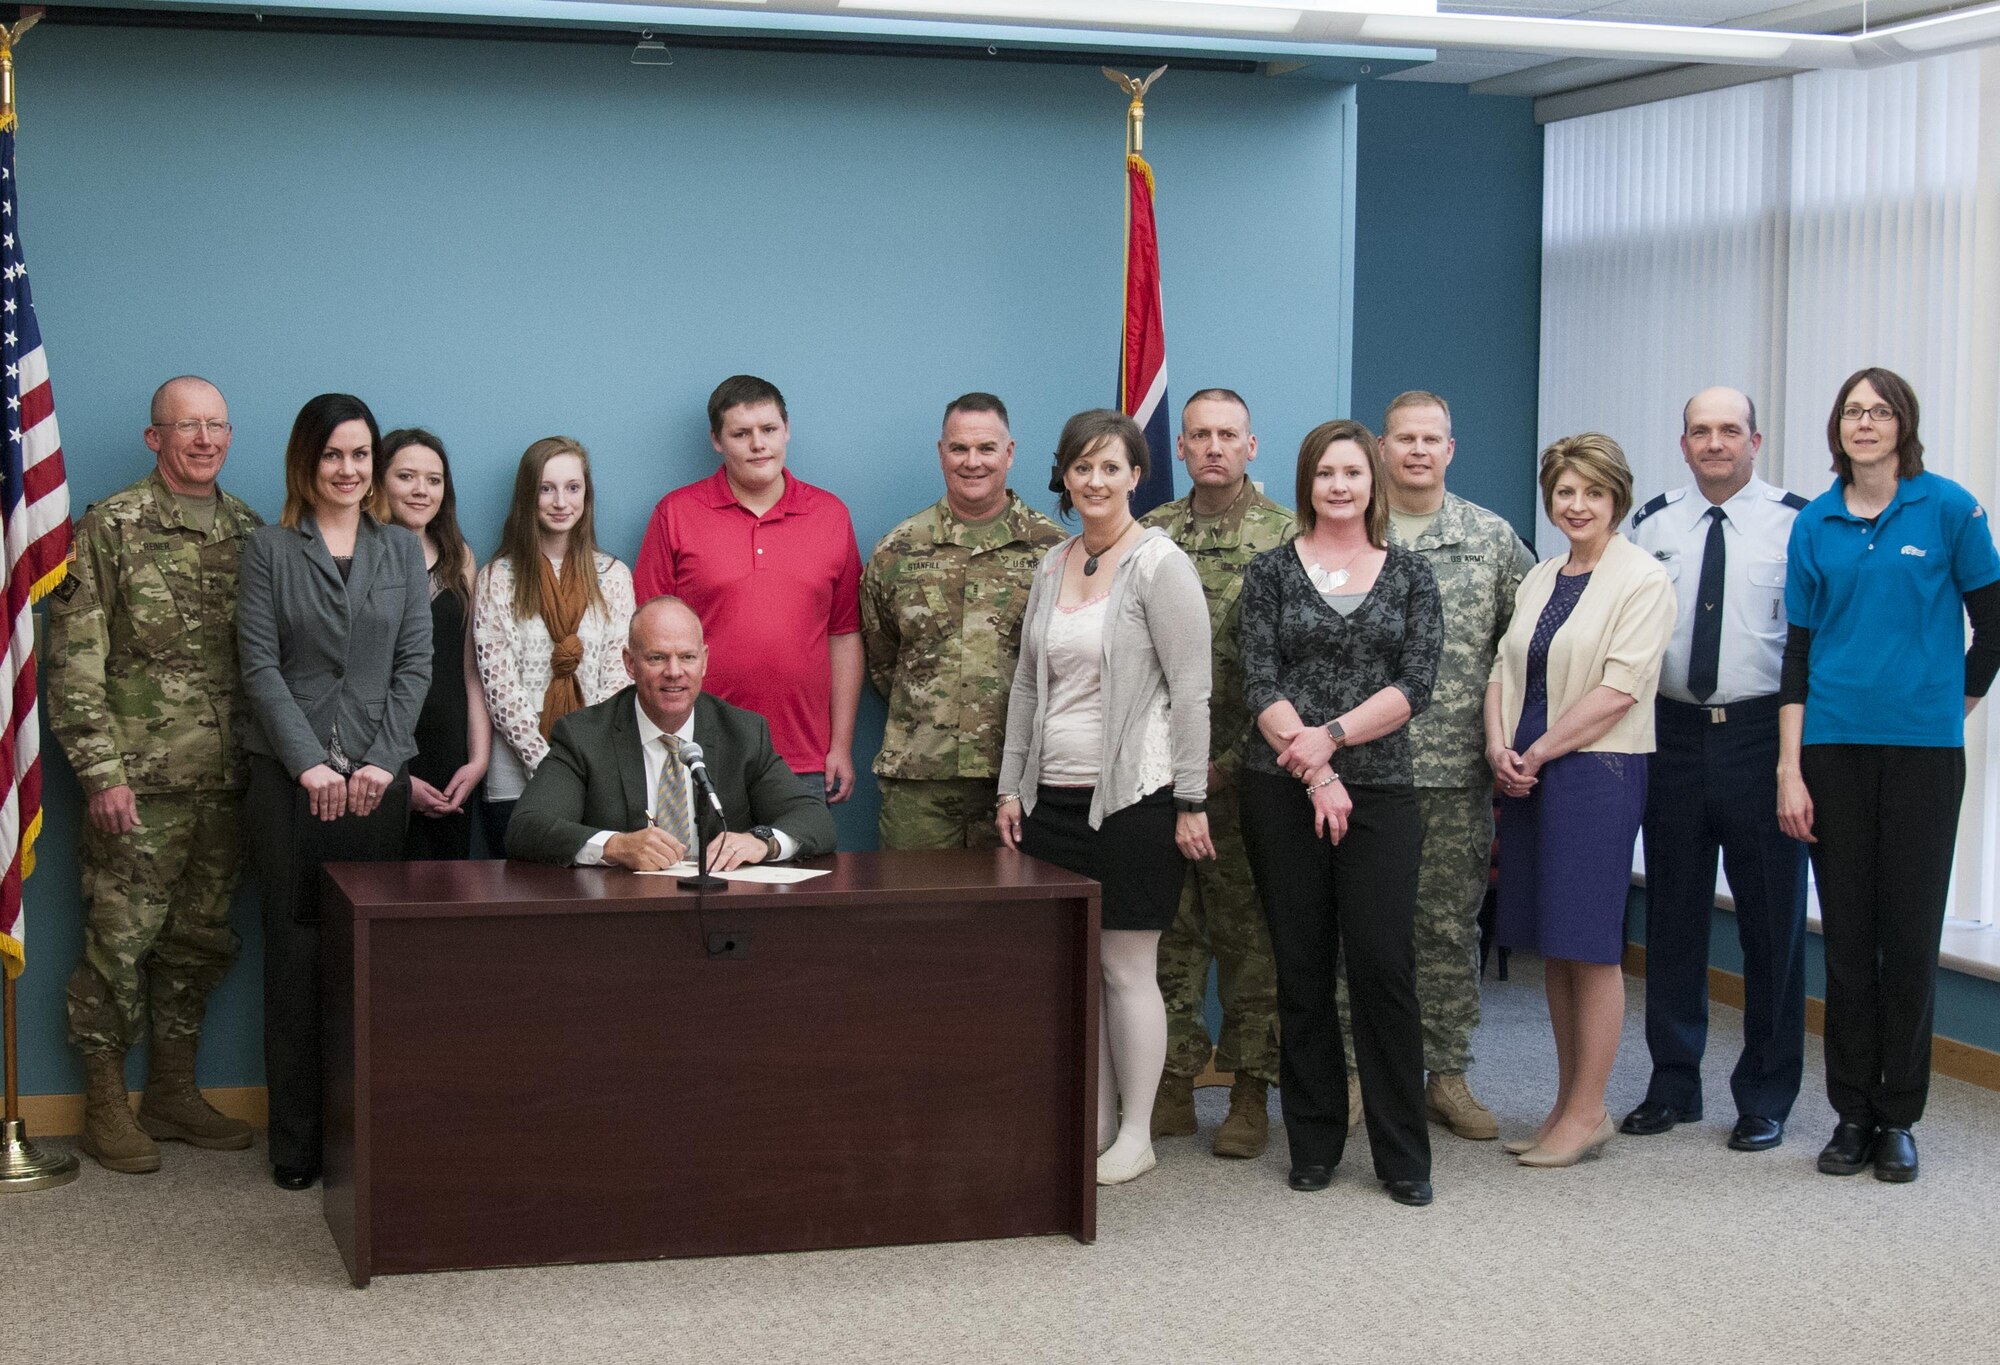 Wyoming Gov. Matt Mead and distinguished guests pose for a photo after Mead signed a proclamation declaring the month of April as Month of the Military Child April 25, 2016, in the Wyoming State Museum in Cheyenne. Representatives and families from military organizations throughout the state attended the event to show support. (U.S. Air Force photo by Senior Airman Jason Wiese)